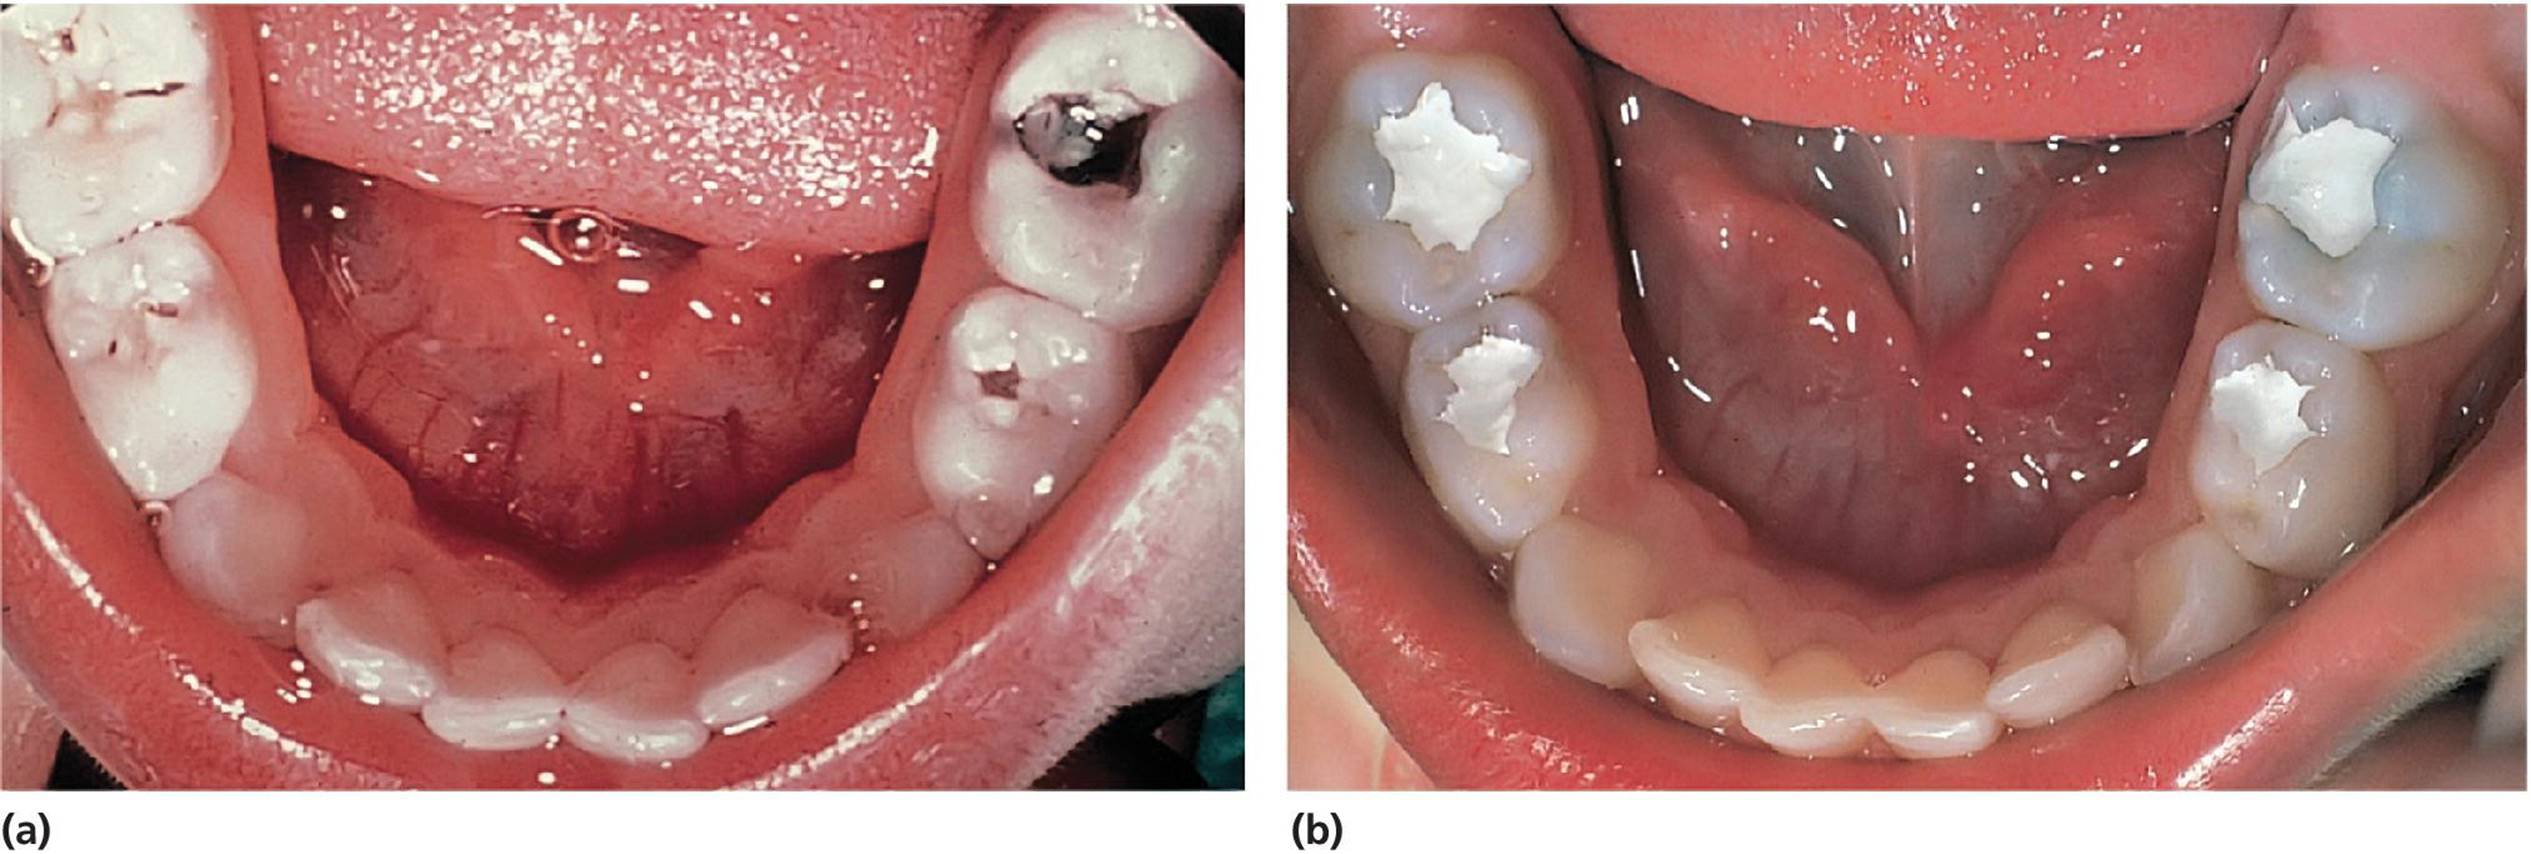 Two photos displaying the mandibular teeth of a 3-year-old boy with high caries activity (left) and after gross excavation of the caries lesions and application of a temporary zinc oxide–eugenol cement (right).